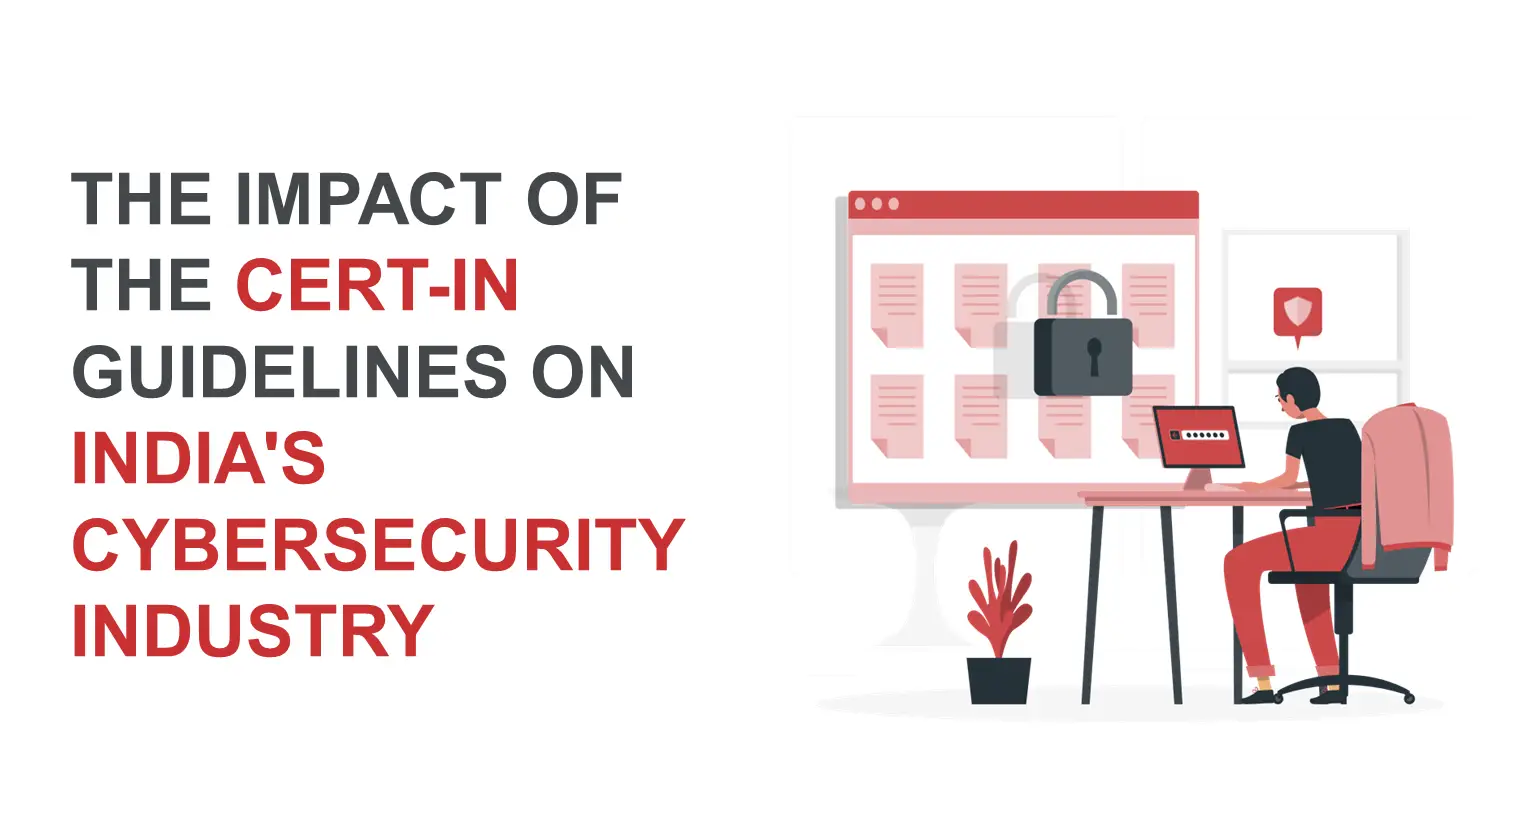 The impact of the CERT-In guidelines on India's cybersecurity industry